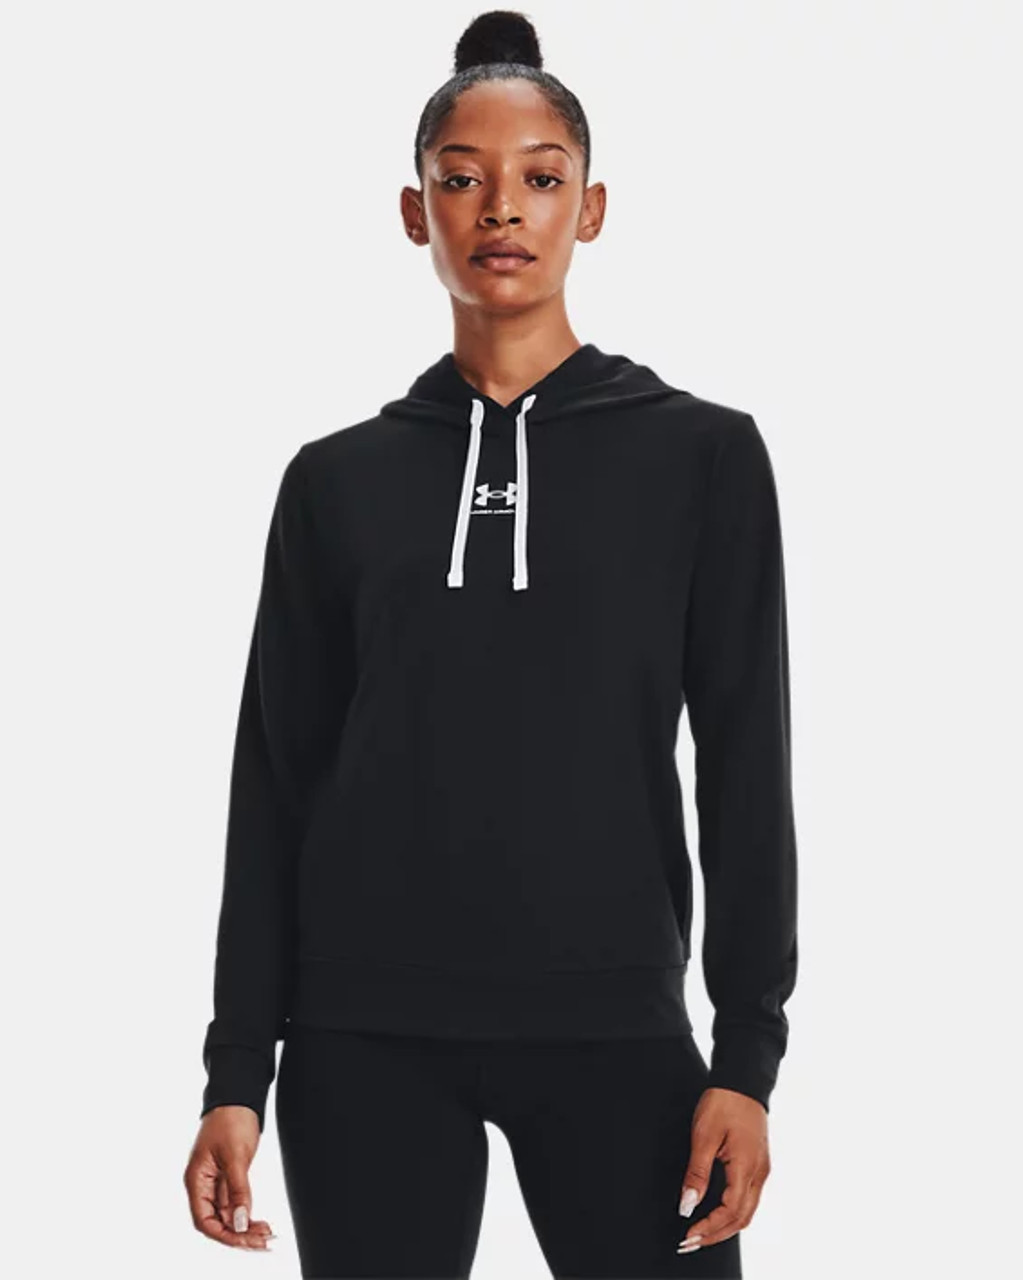 Under Armour Women's Rival Terry Hoodie